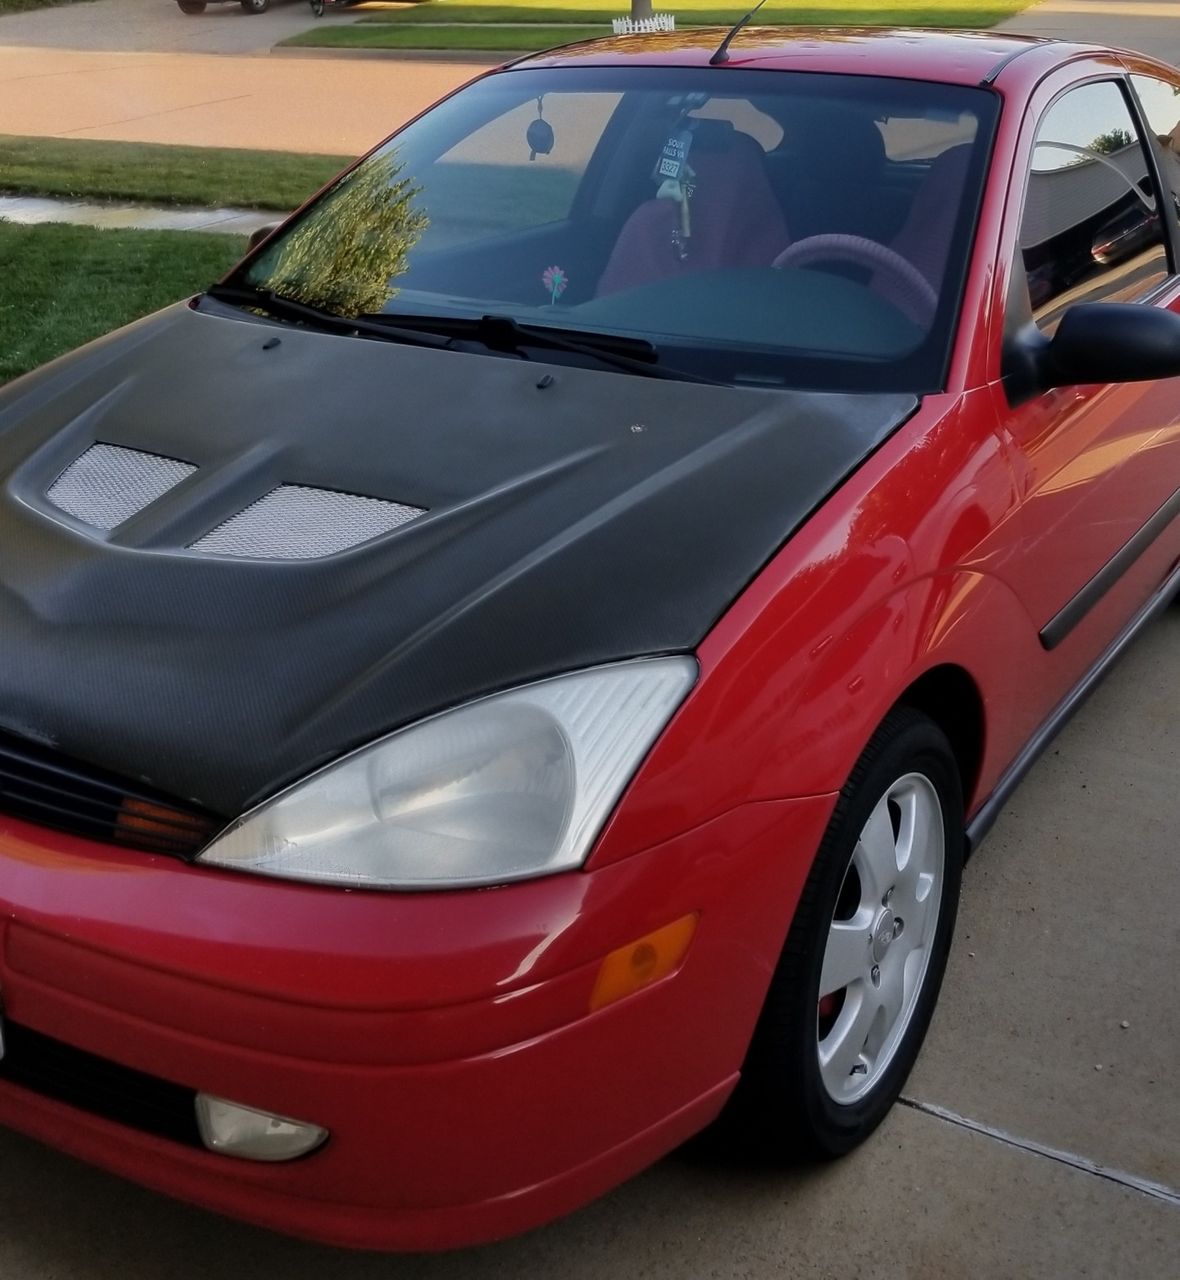 2001 Ford Focus | Brandon, SD, Infra-Red Clearcoat (Red & Orange), Front Wheel